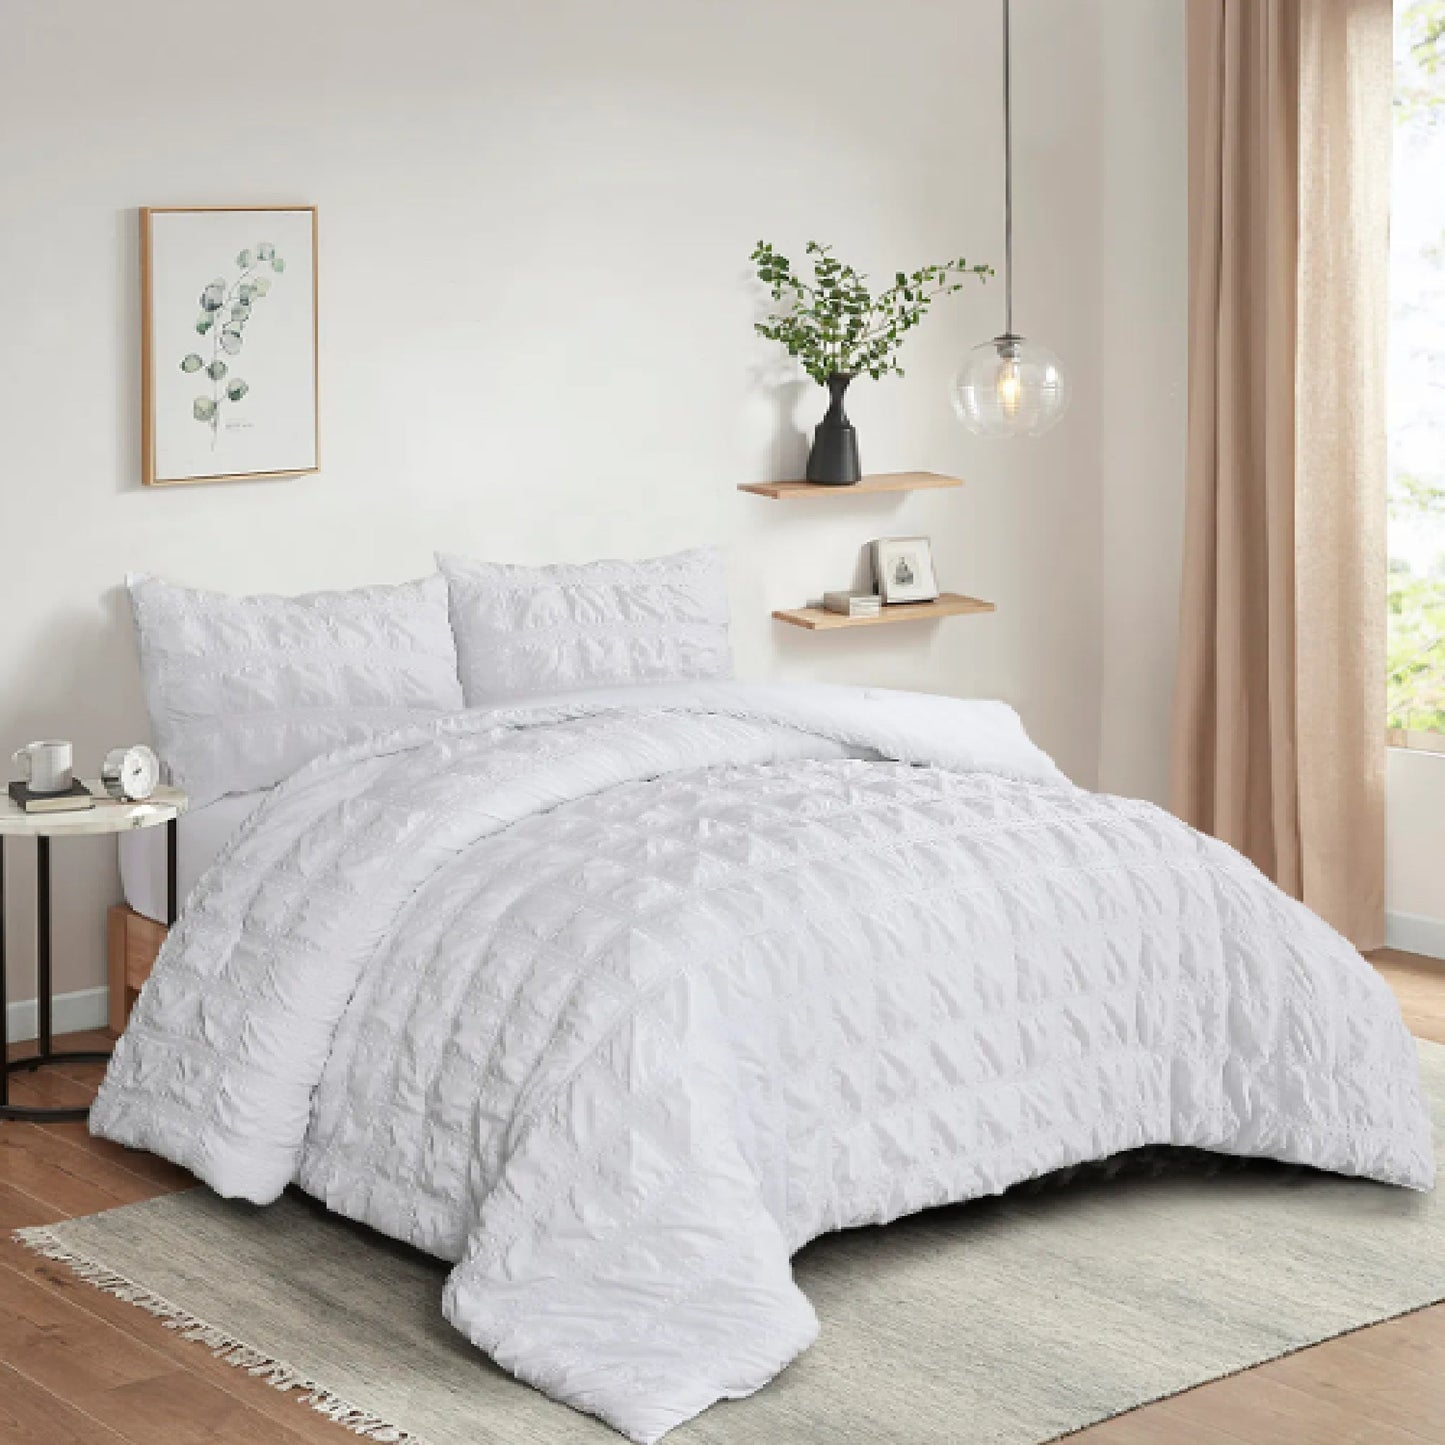 Transform Your Sleep Space with Hypoallergenic Comfort and Style - white